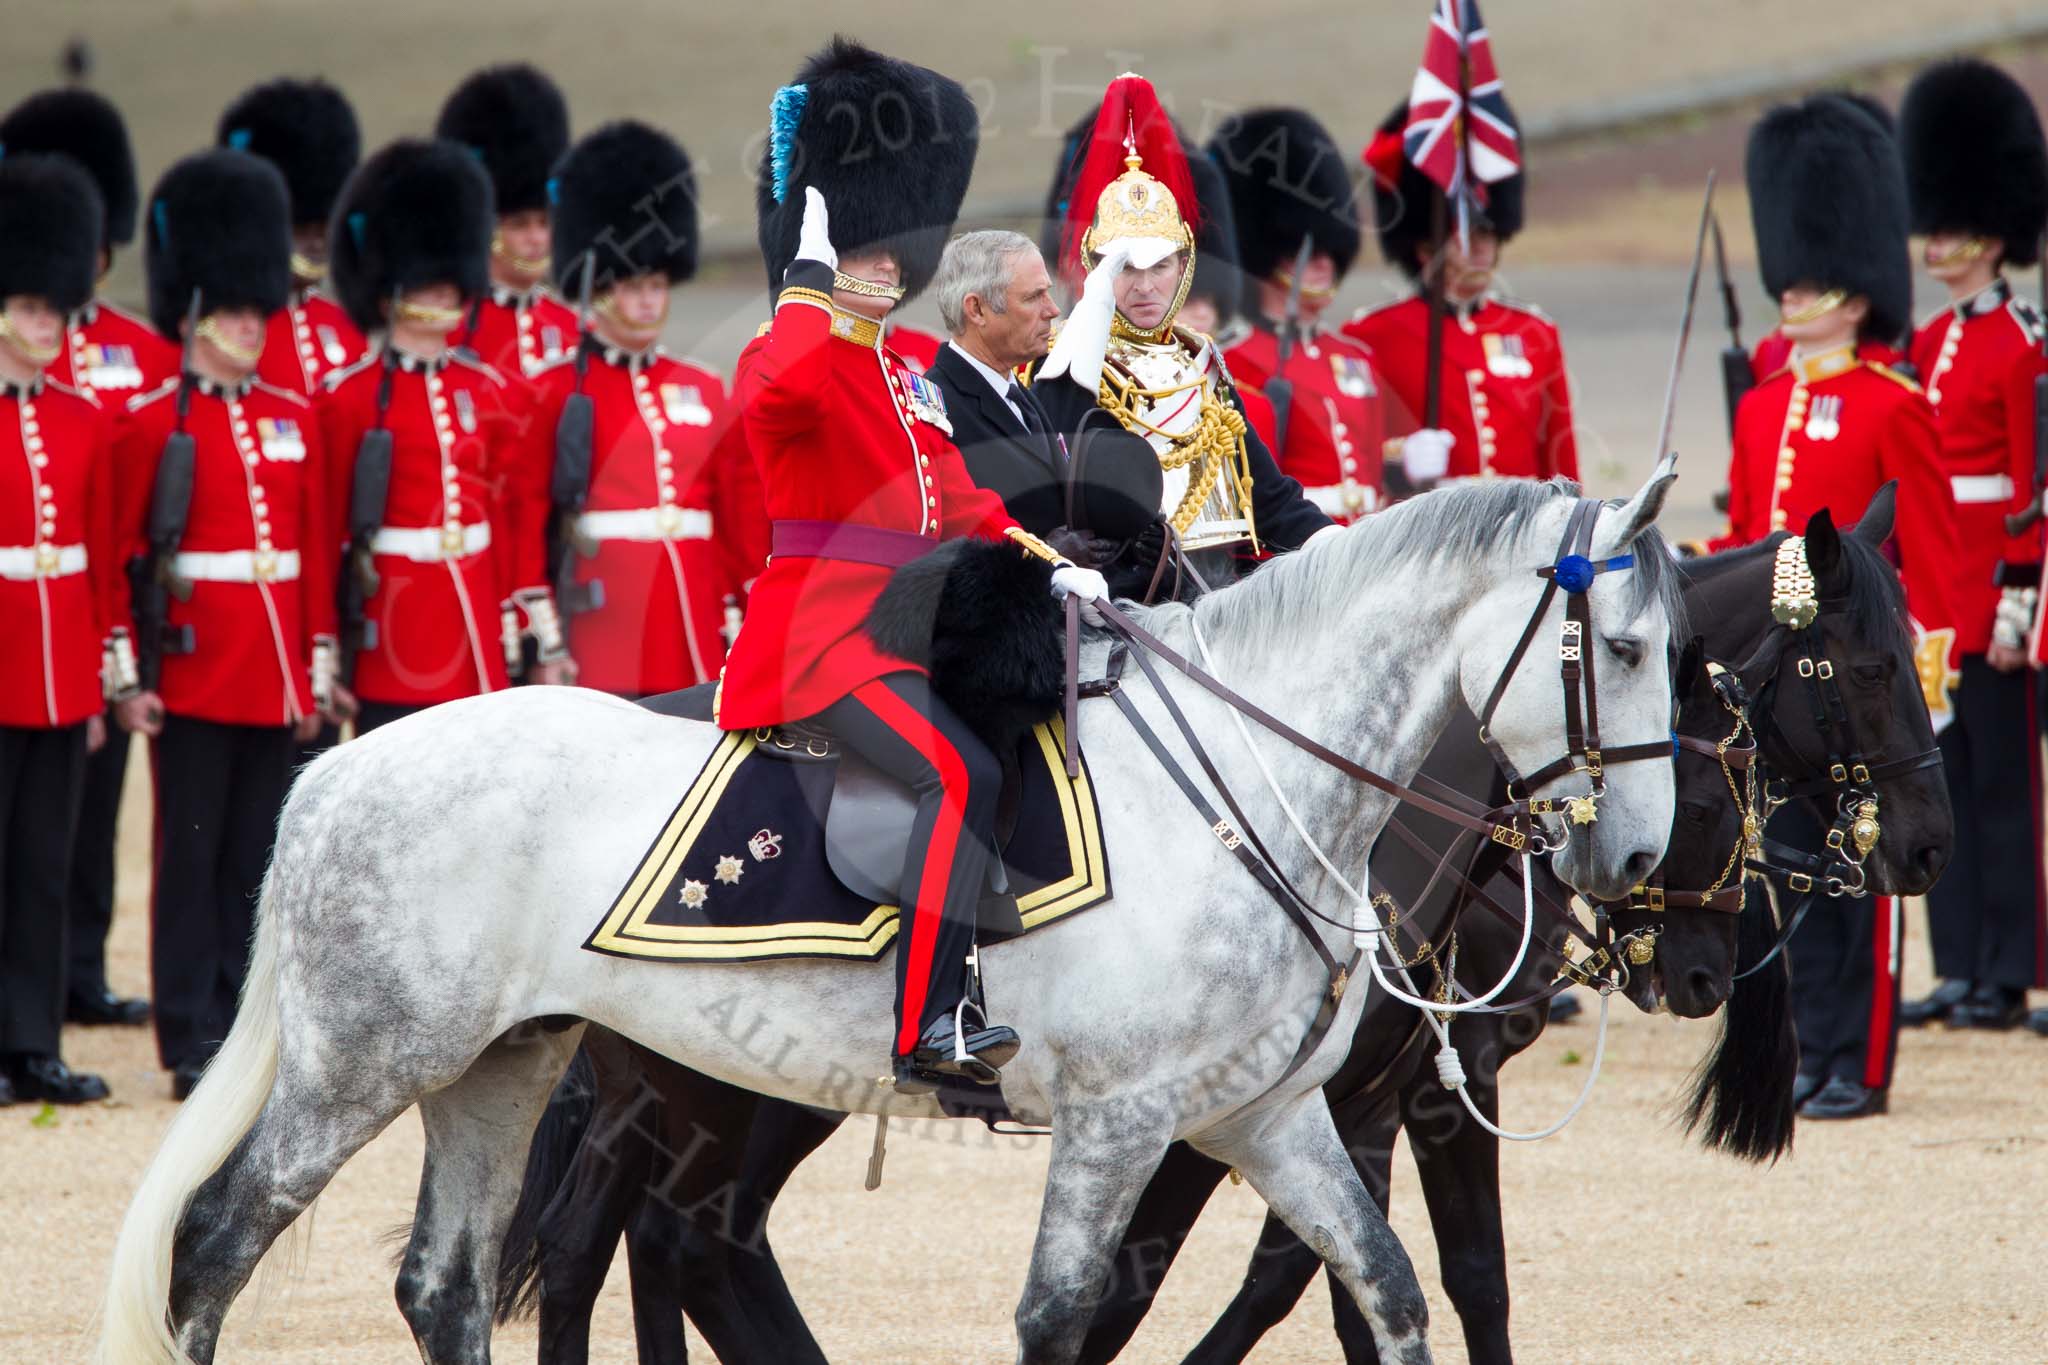 The Colonel's Review 2012: Representing the Royal Colonels (guessing here!): On the left, a Captain of the Irish Guards, riding the horse of the Duke of Cambridge, in the middle the Queen's Stud Groom, riding the Prince of Wales's horse, and on the right a Lieutenant Colonel of the Blues and Royal, riding the horse of the Princess Royal..
Horse Guards Parade, Westminster,
London SW1,

United Kingdom,
on 09 June 2012 at 11:01, image #179